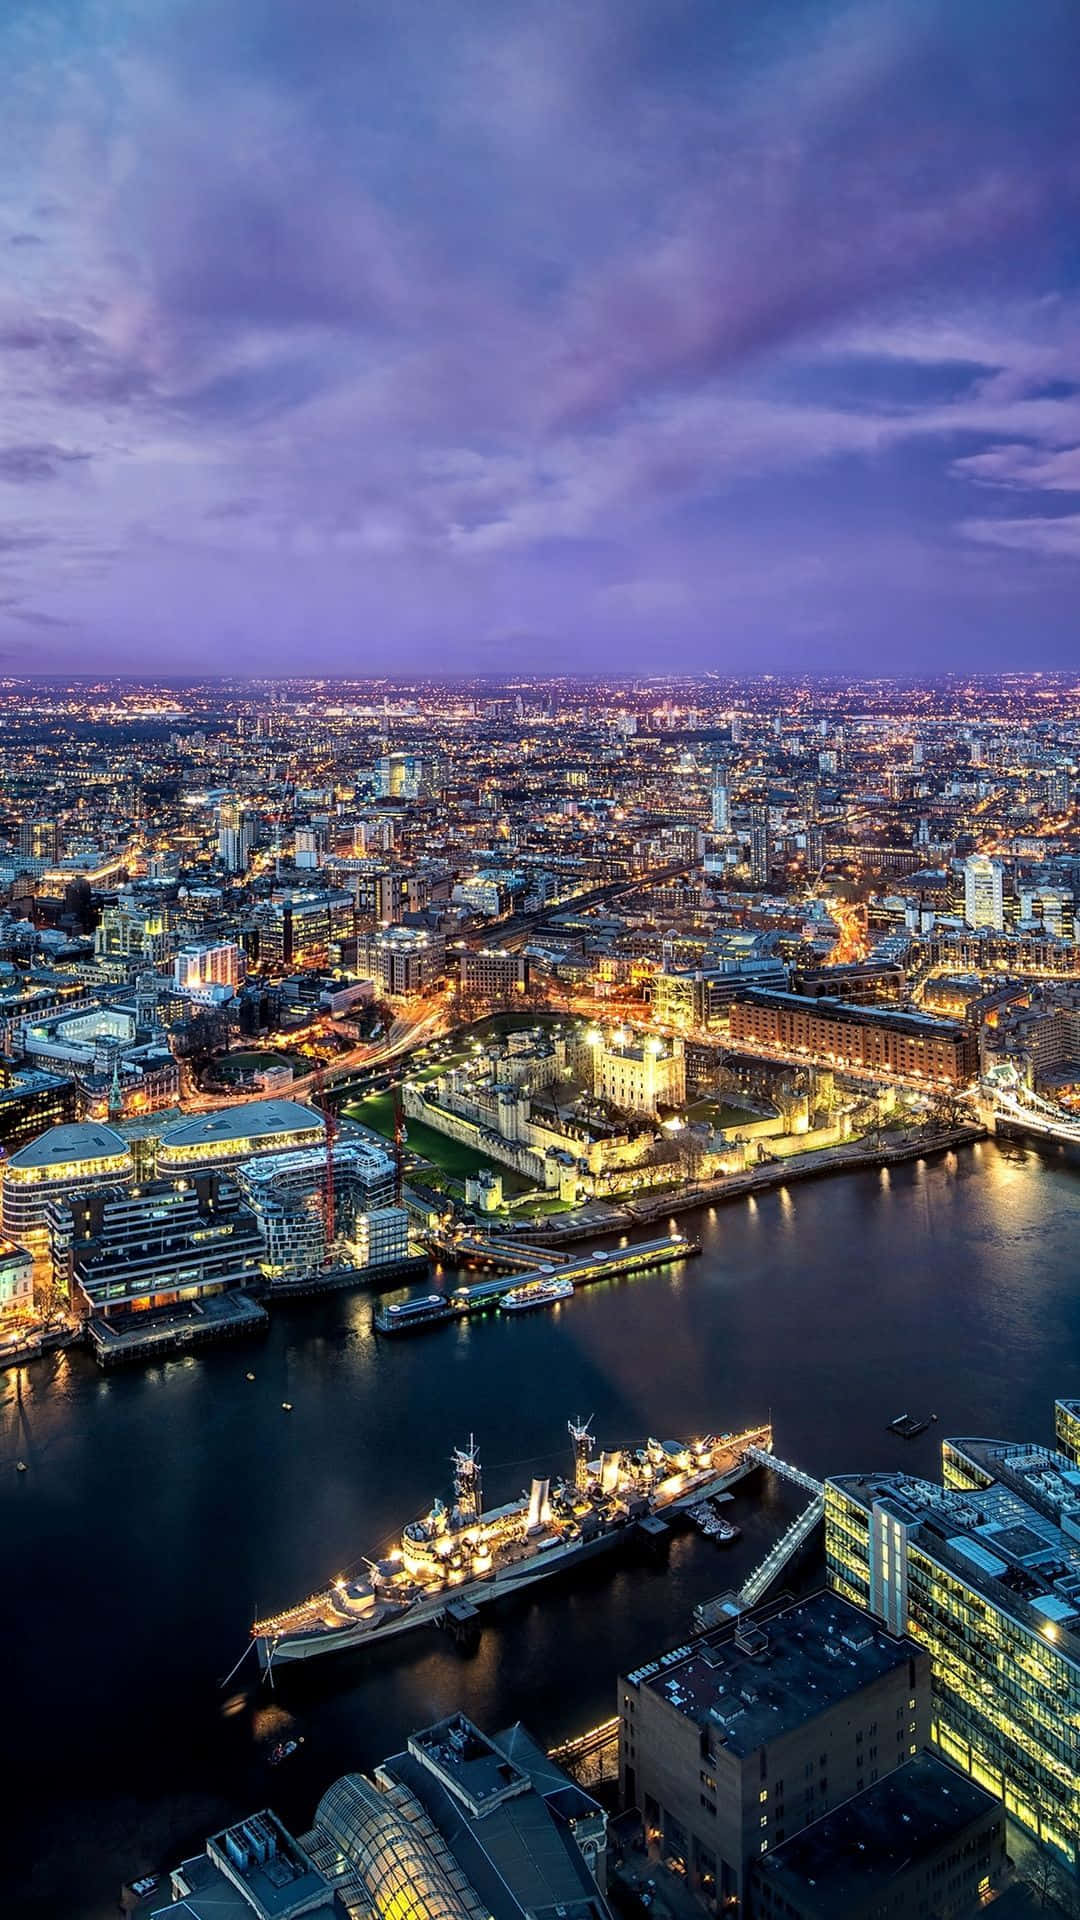 A View Of The City Of London At Night Wallpaper